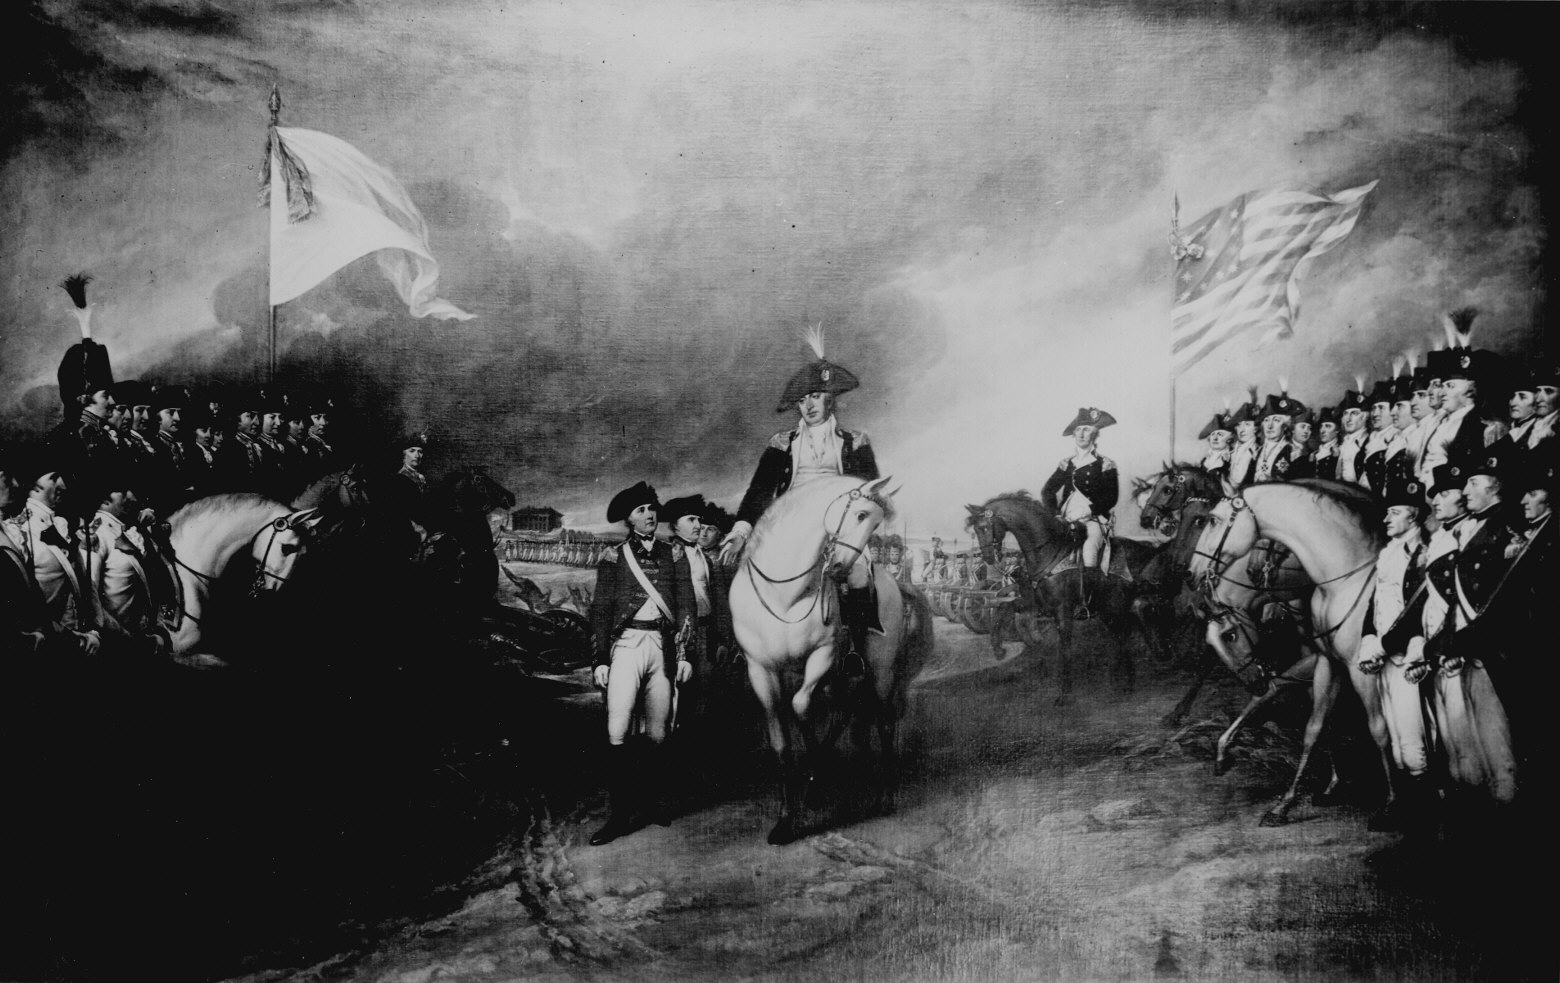 the first armed conflict of the revolutionary war was provoked by what act?